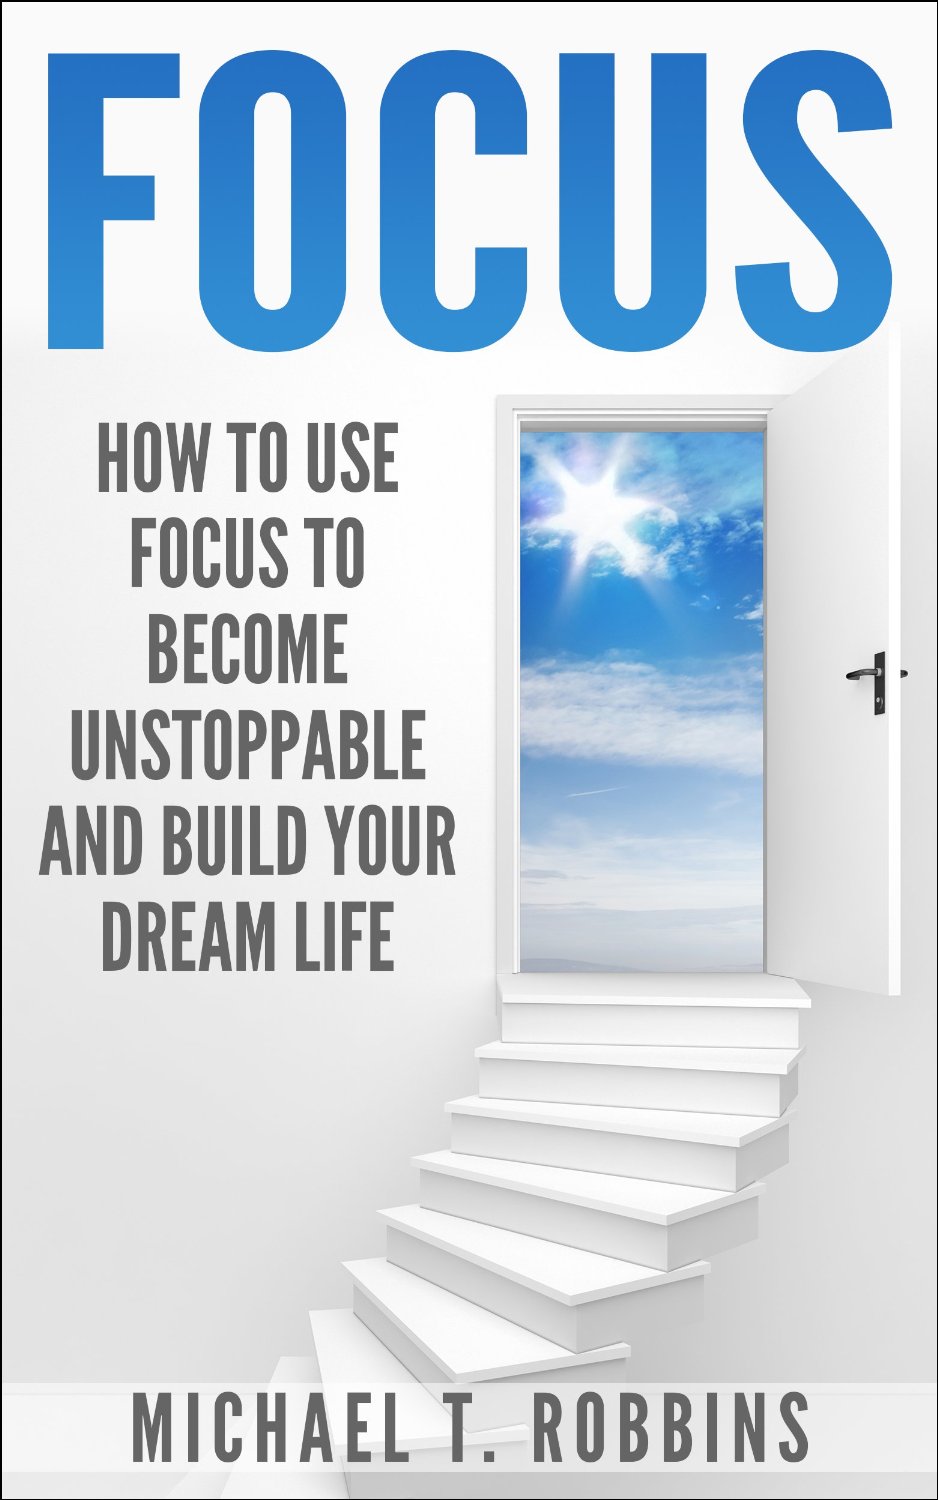 Focus: How to Use Focus to Become Unstoppable and Build Your Dream Life by Michael T. Robbins